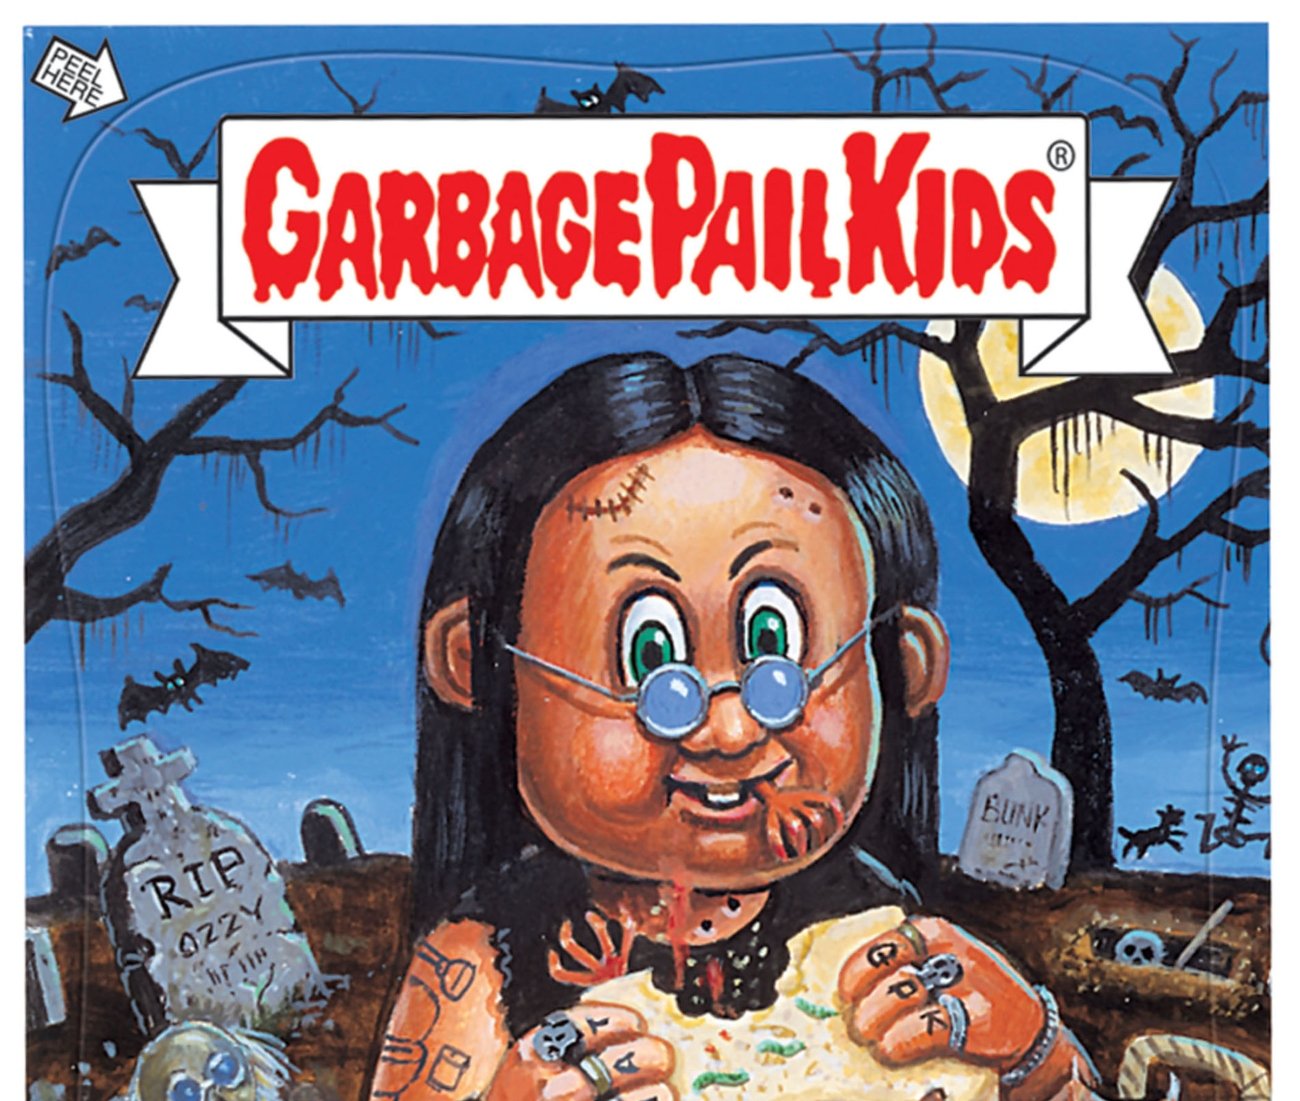 In this handout image provided by Topps, a ‘Garbage Pail Kids’ trading card is shown March 31, 2004 in New York City